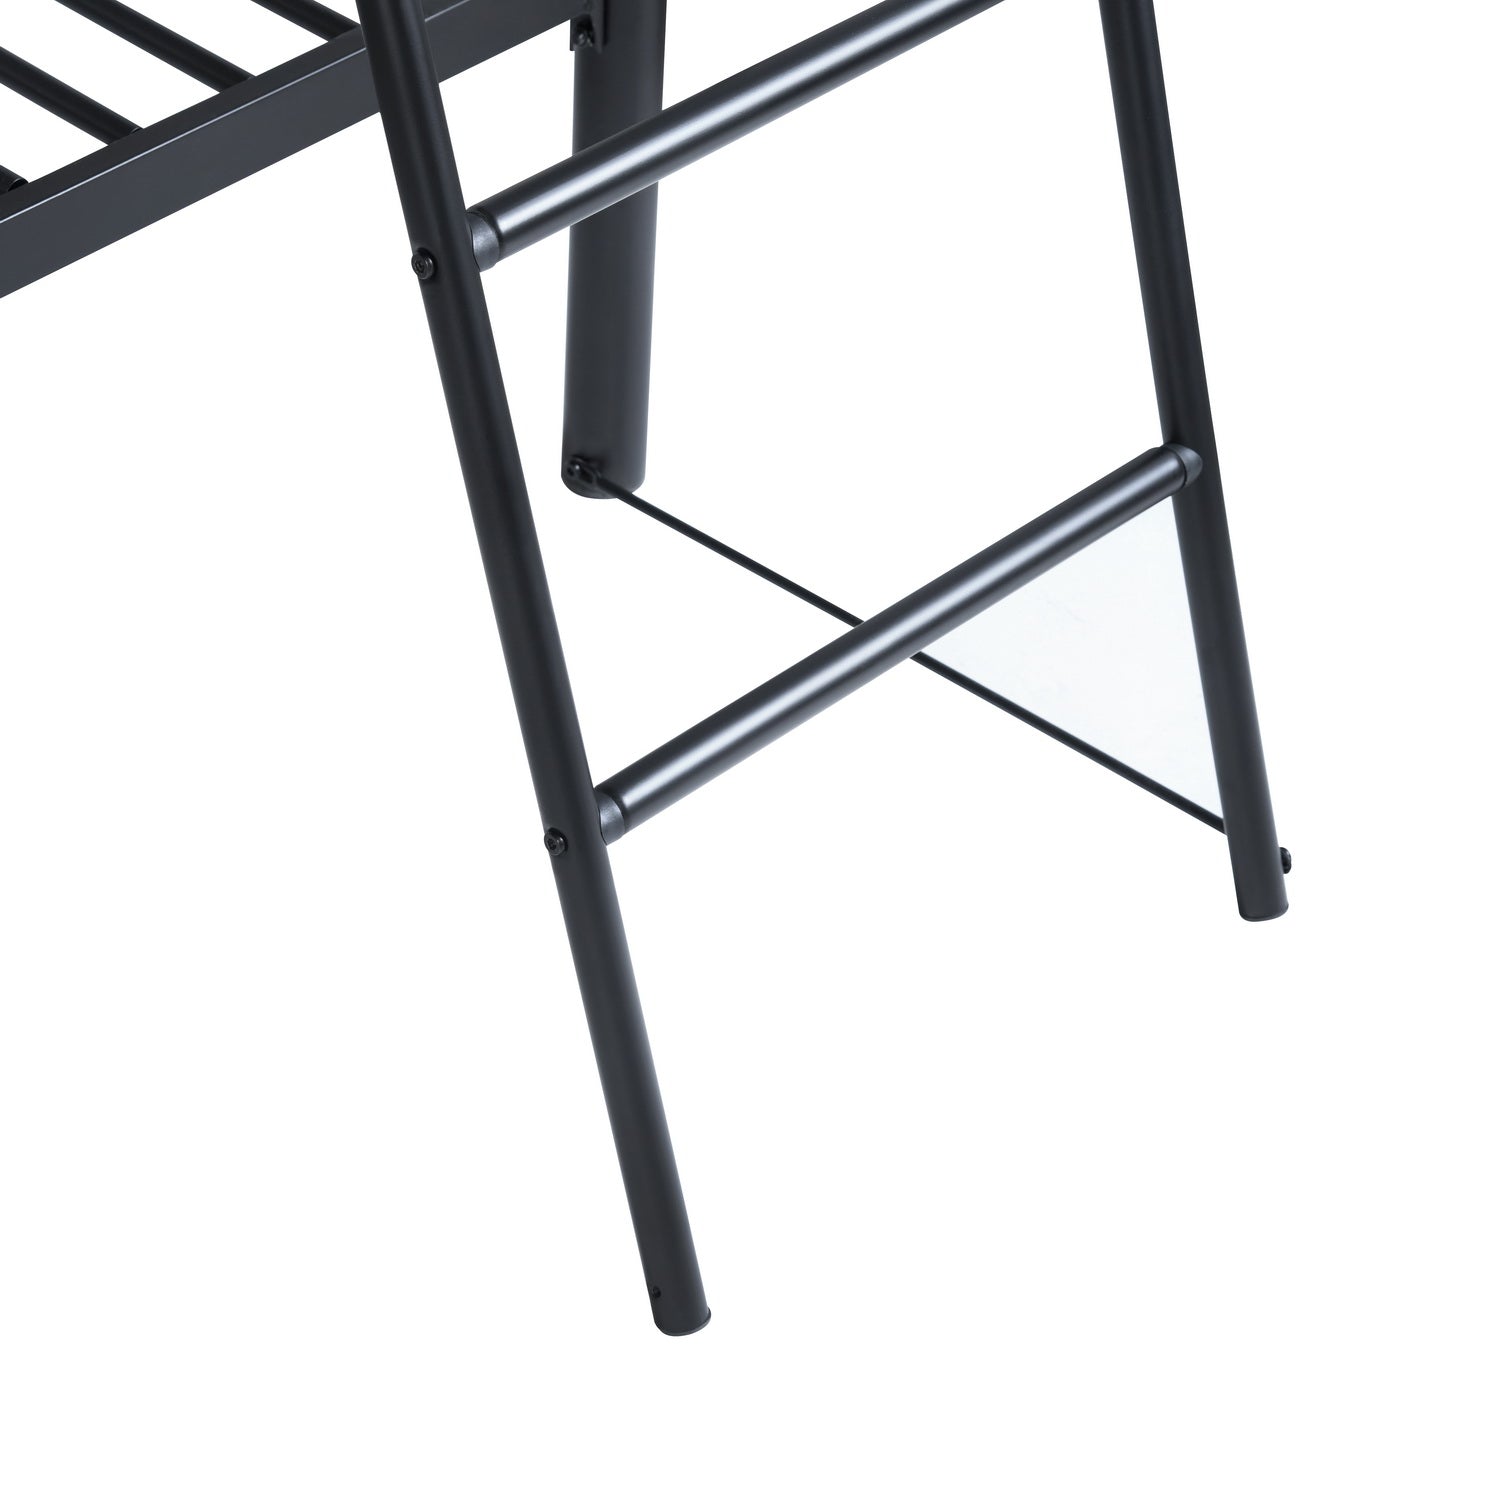 4-seater black metal bunk bed with ladder 140x190cm (mattress not included) - TWIN DOUBLE BLACK PLUS